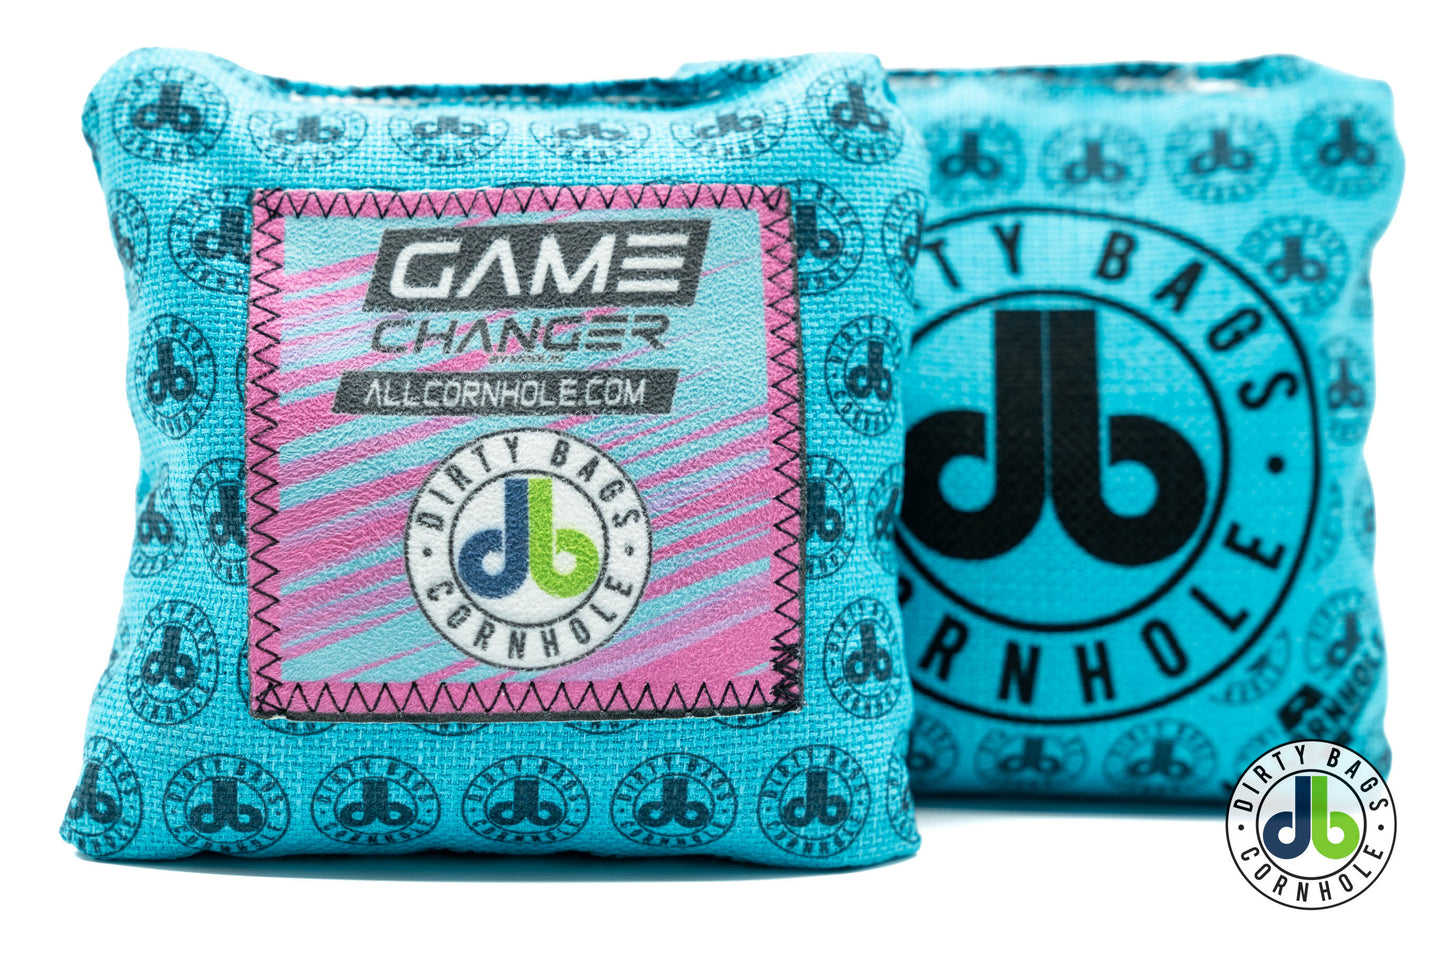 Game Changer Cornhole Bags - db Pattern and Color Patches (Set of 4)